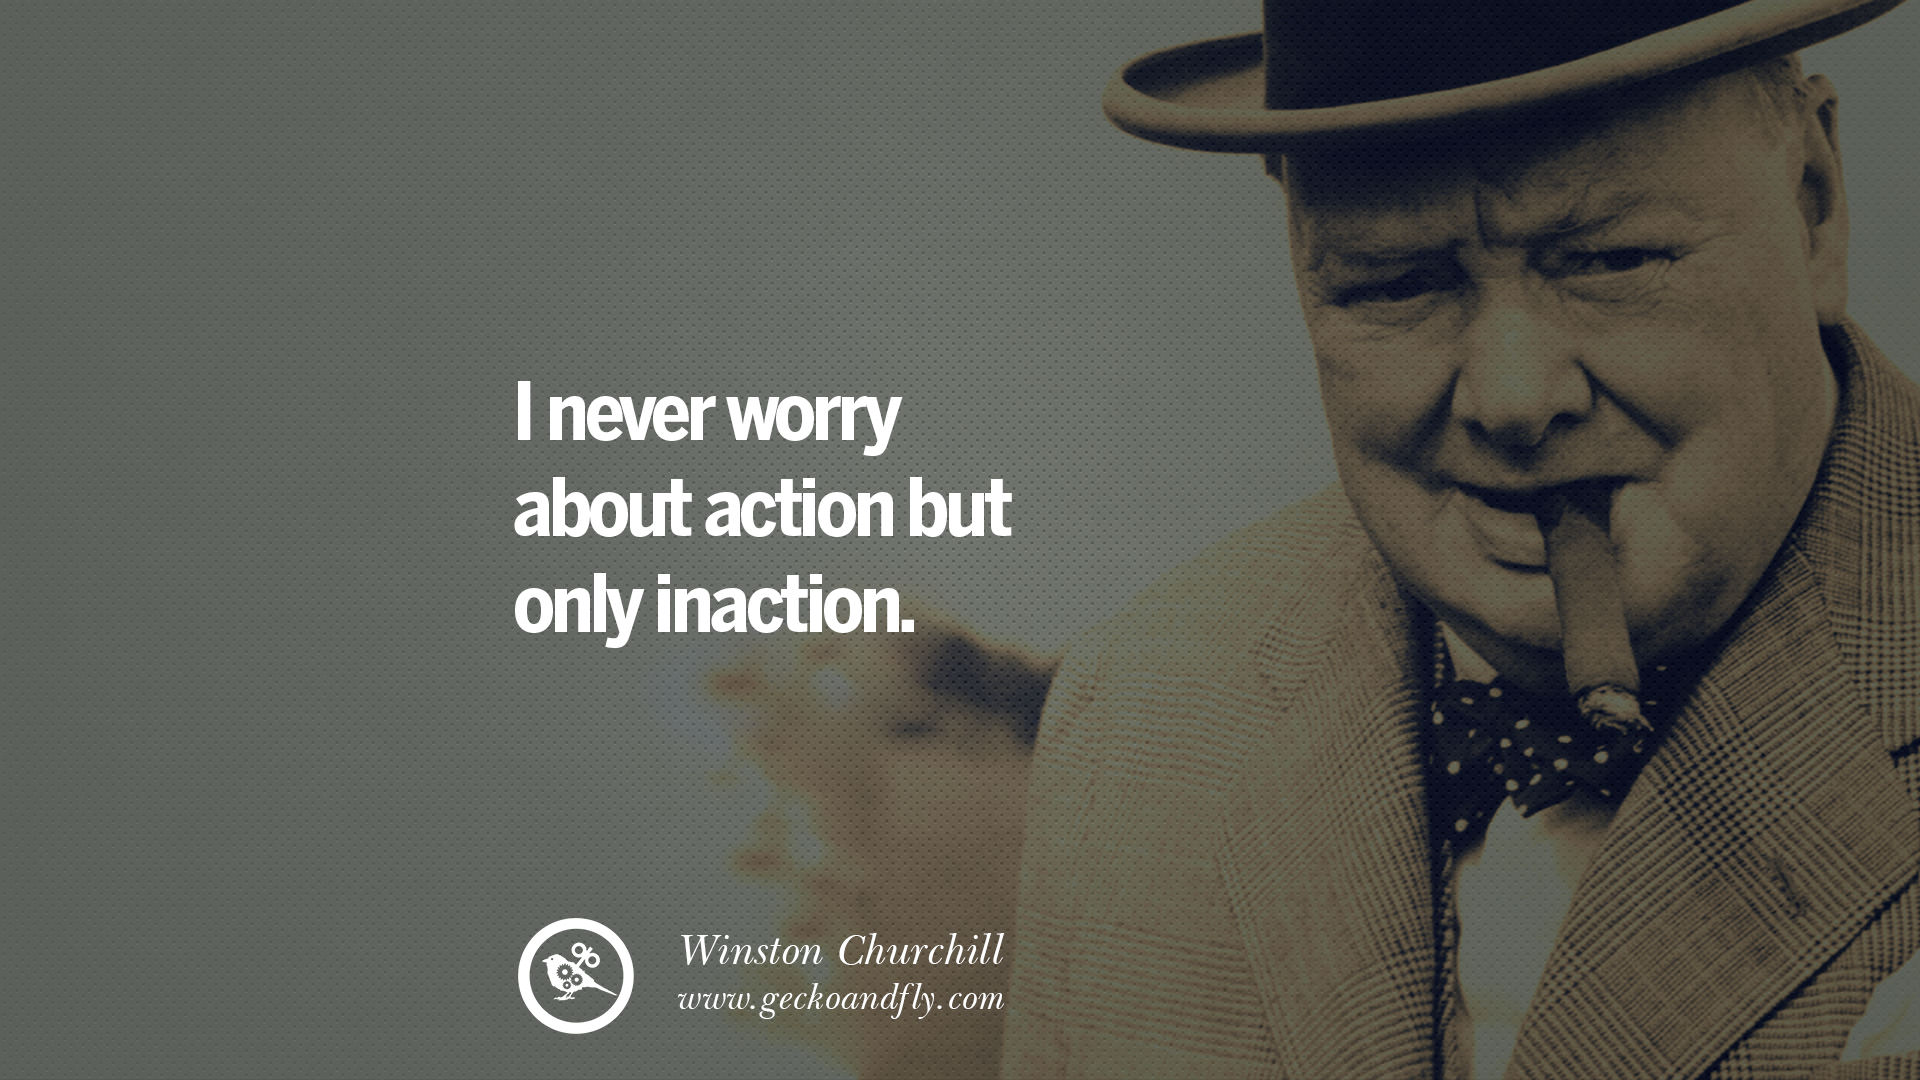 30 Sir Winston Churchill Quotes and Speeches on Success, Courage, and